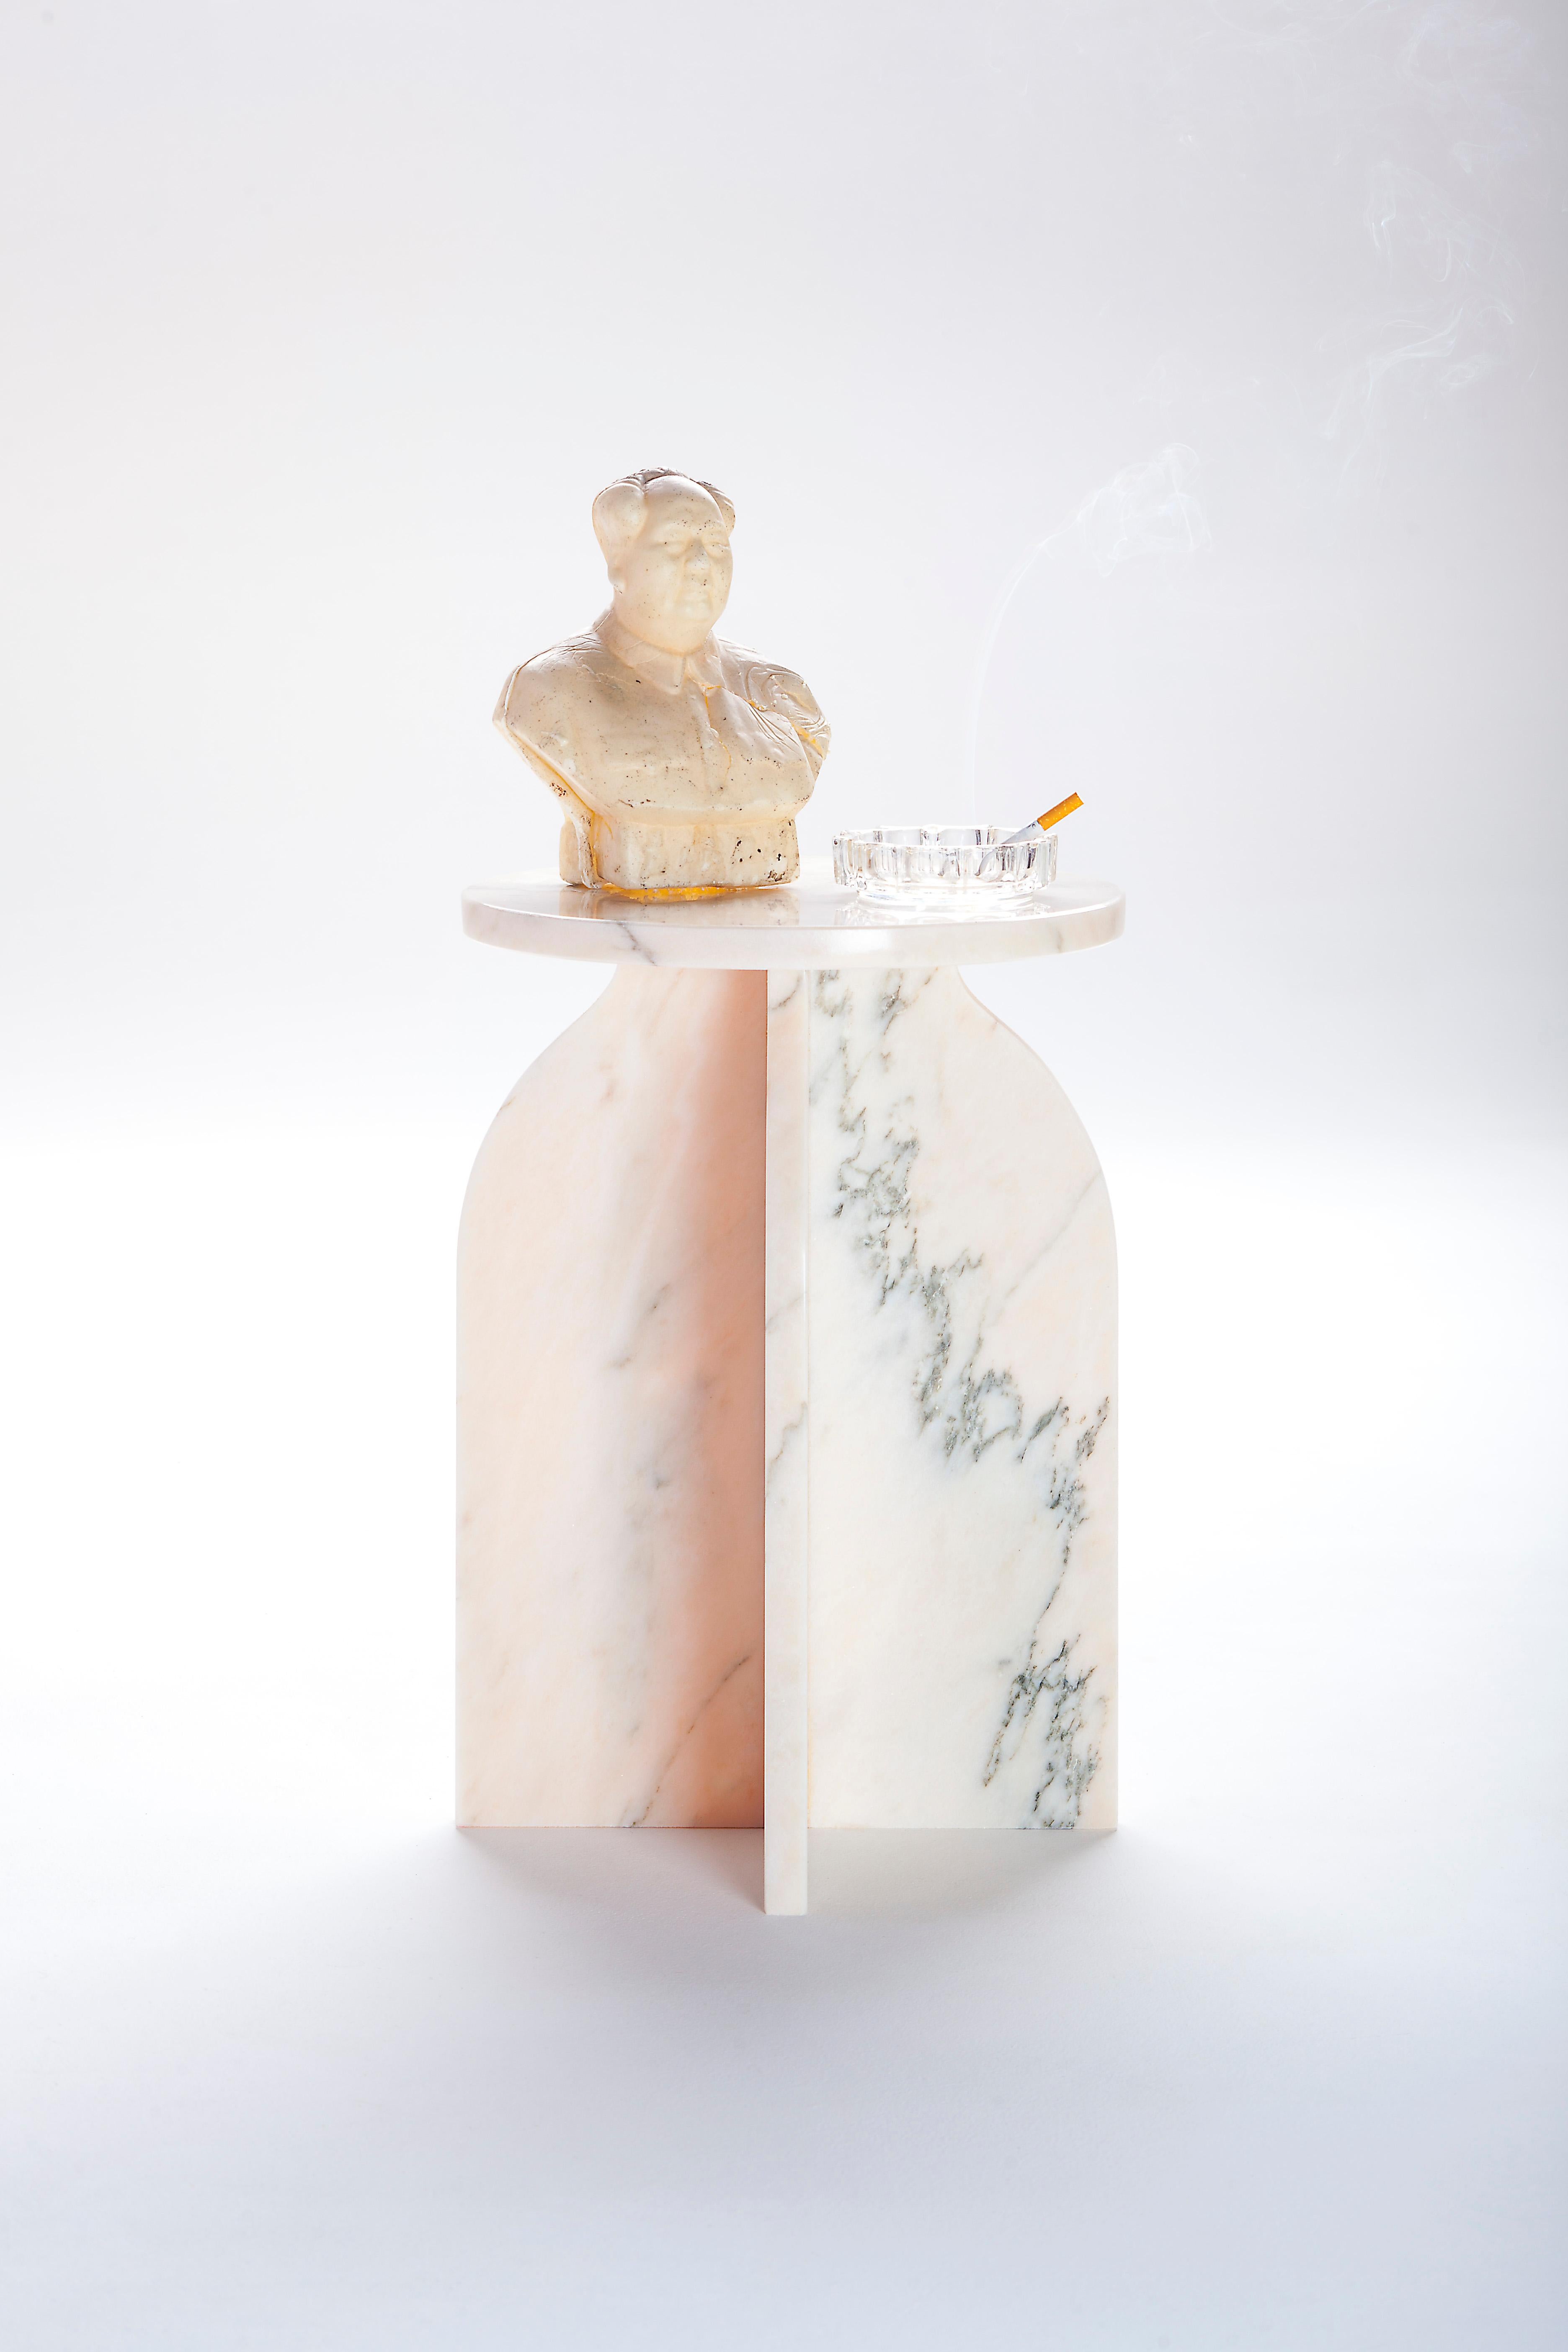 Marble side table by Joseph Vila Capdevila
Material: Marble
Dimensions: 33 x 47 cm
Weight: 19.1kg

Low table composed of a circular envelope of treated marble, supported on four legs of the same material and forming two pointed arches in